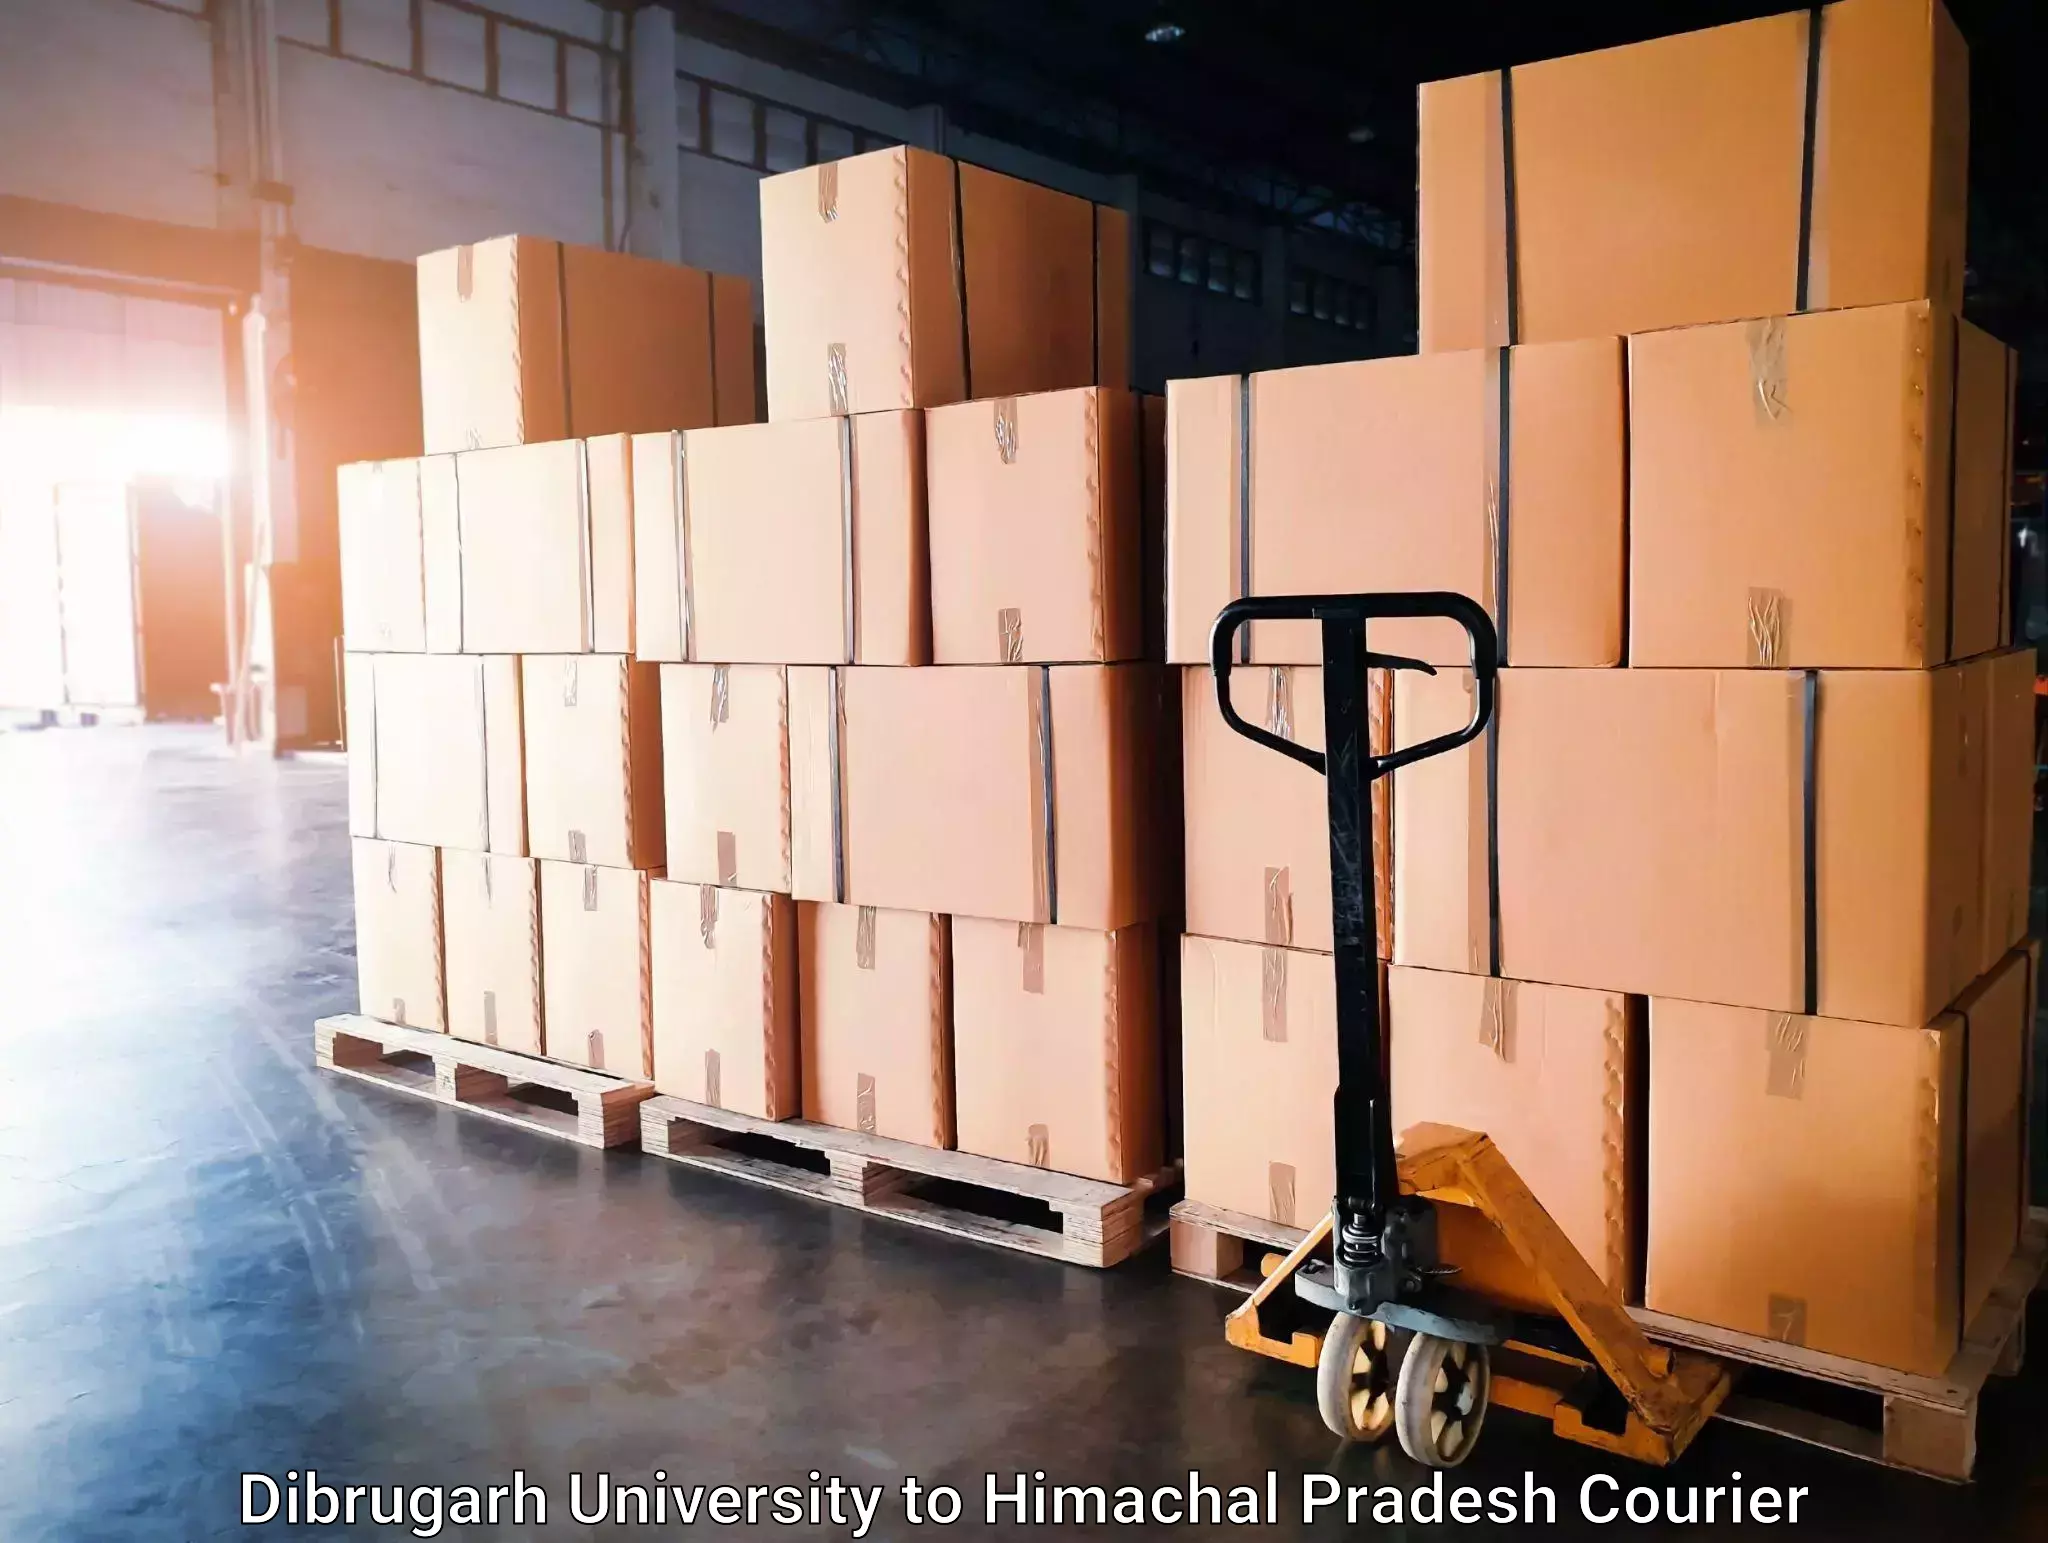 Efficient freight service in Dibrugarh University to Dheera